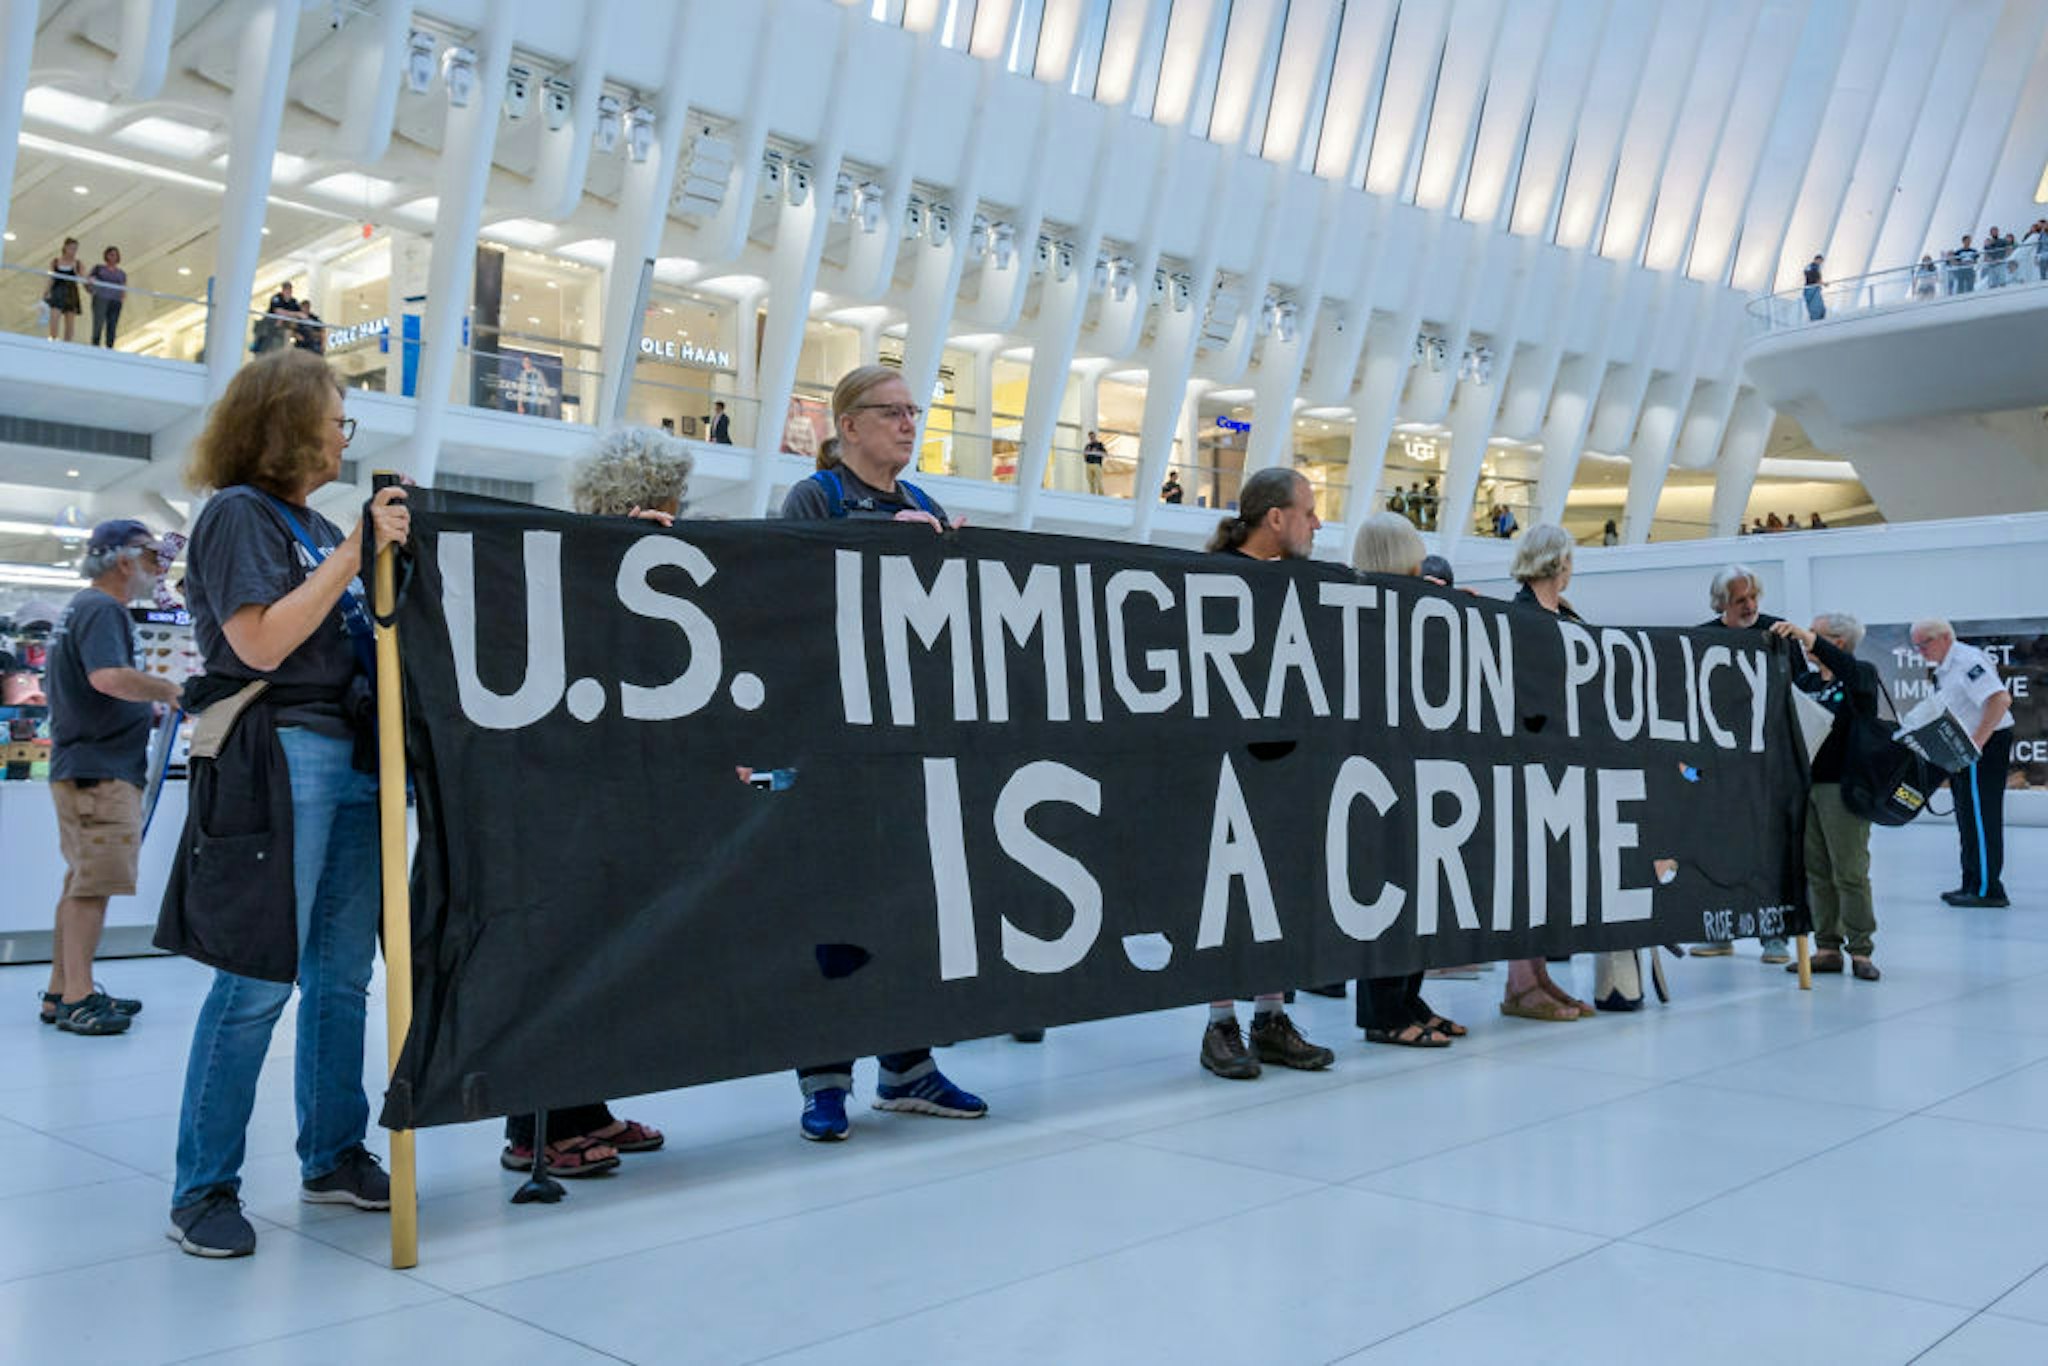 Members of the activist group Rise And Resist gathered at a silent protest inside The Oculus on September 12, 2019 holding NO RAIDS/CLOSE THE CAMPS/ABOLISH ICE banners, photographs of the children who have died in ICE custody, and photographs of the detention camps to object to Border Patrol and ICE treatment of immigrants, refugees, and asylum seekers.